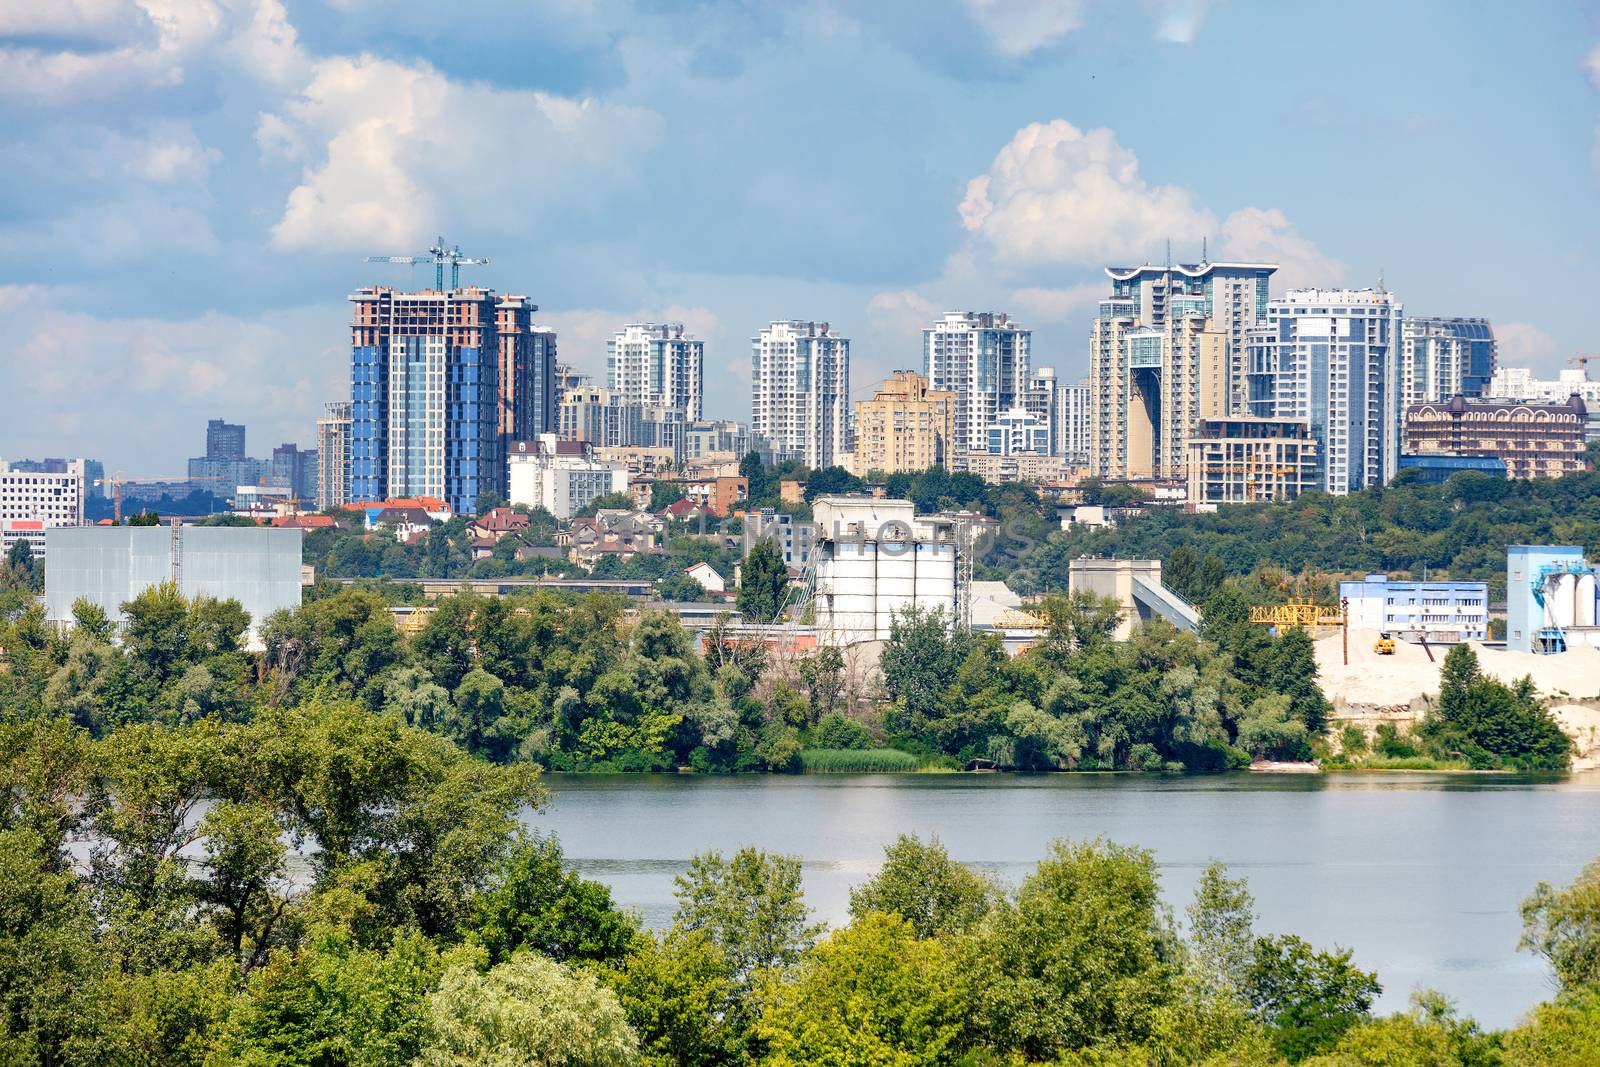 Construction of new high-rise buildings on the right bank of the Dnipro River in Kyiv, a view of the facades of multi-storey residential buildings among private houses and a blue cloudy sky, copy space.